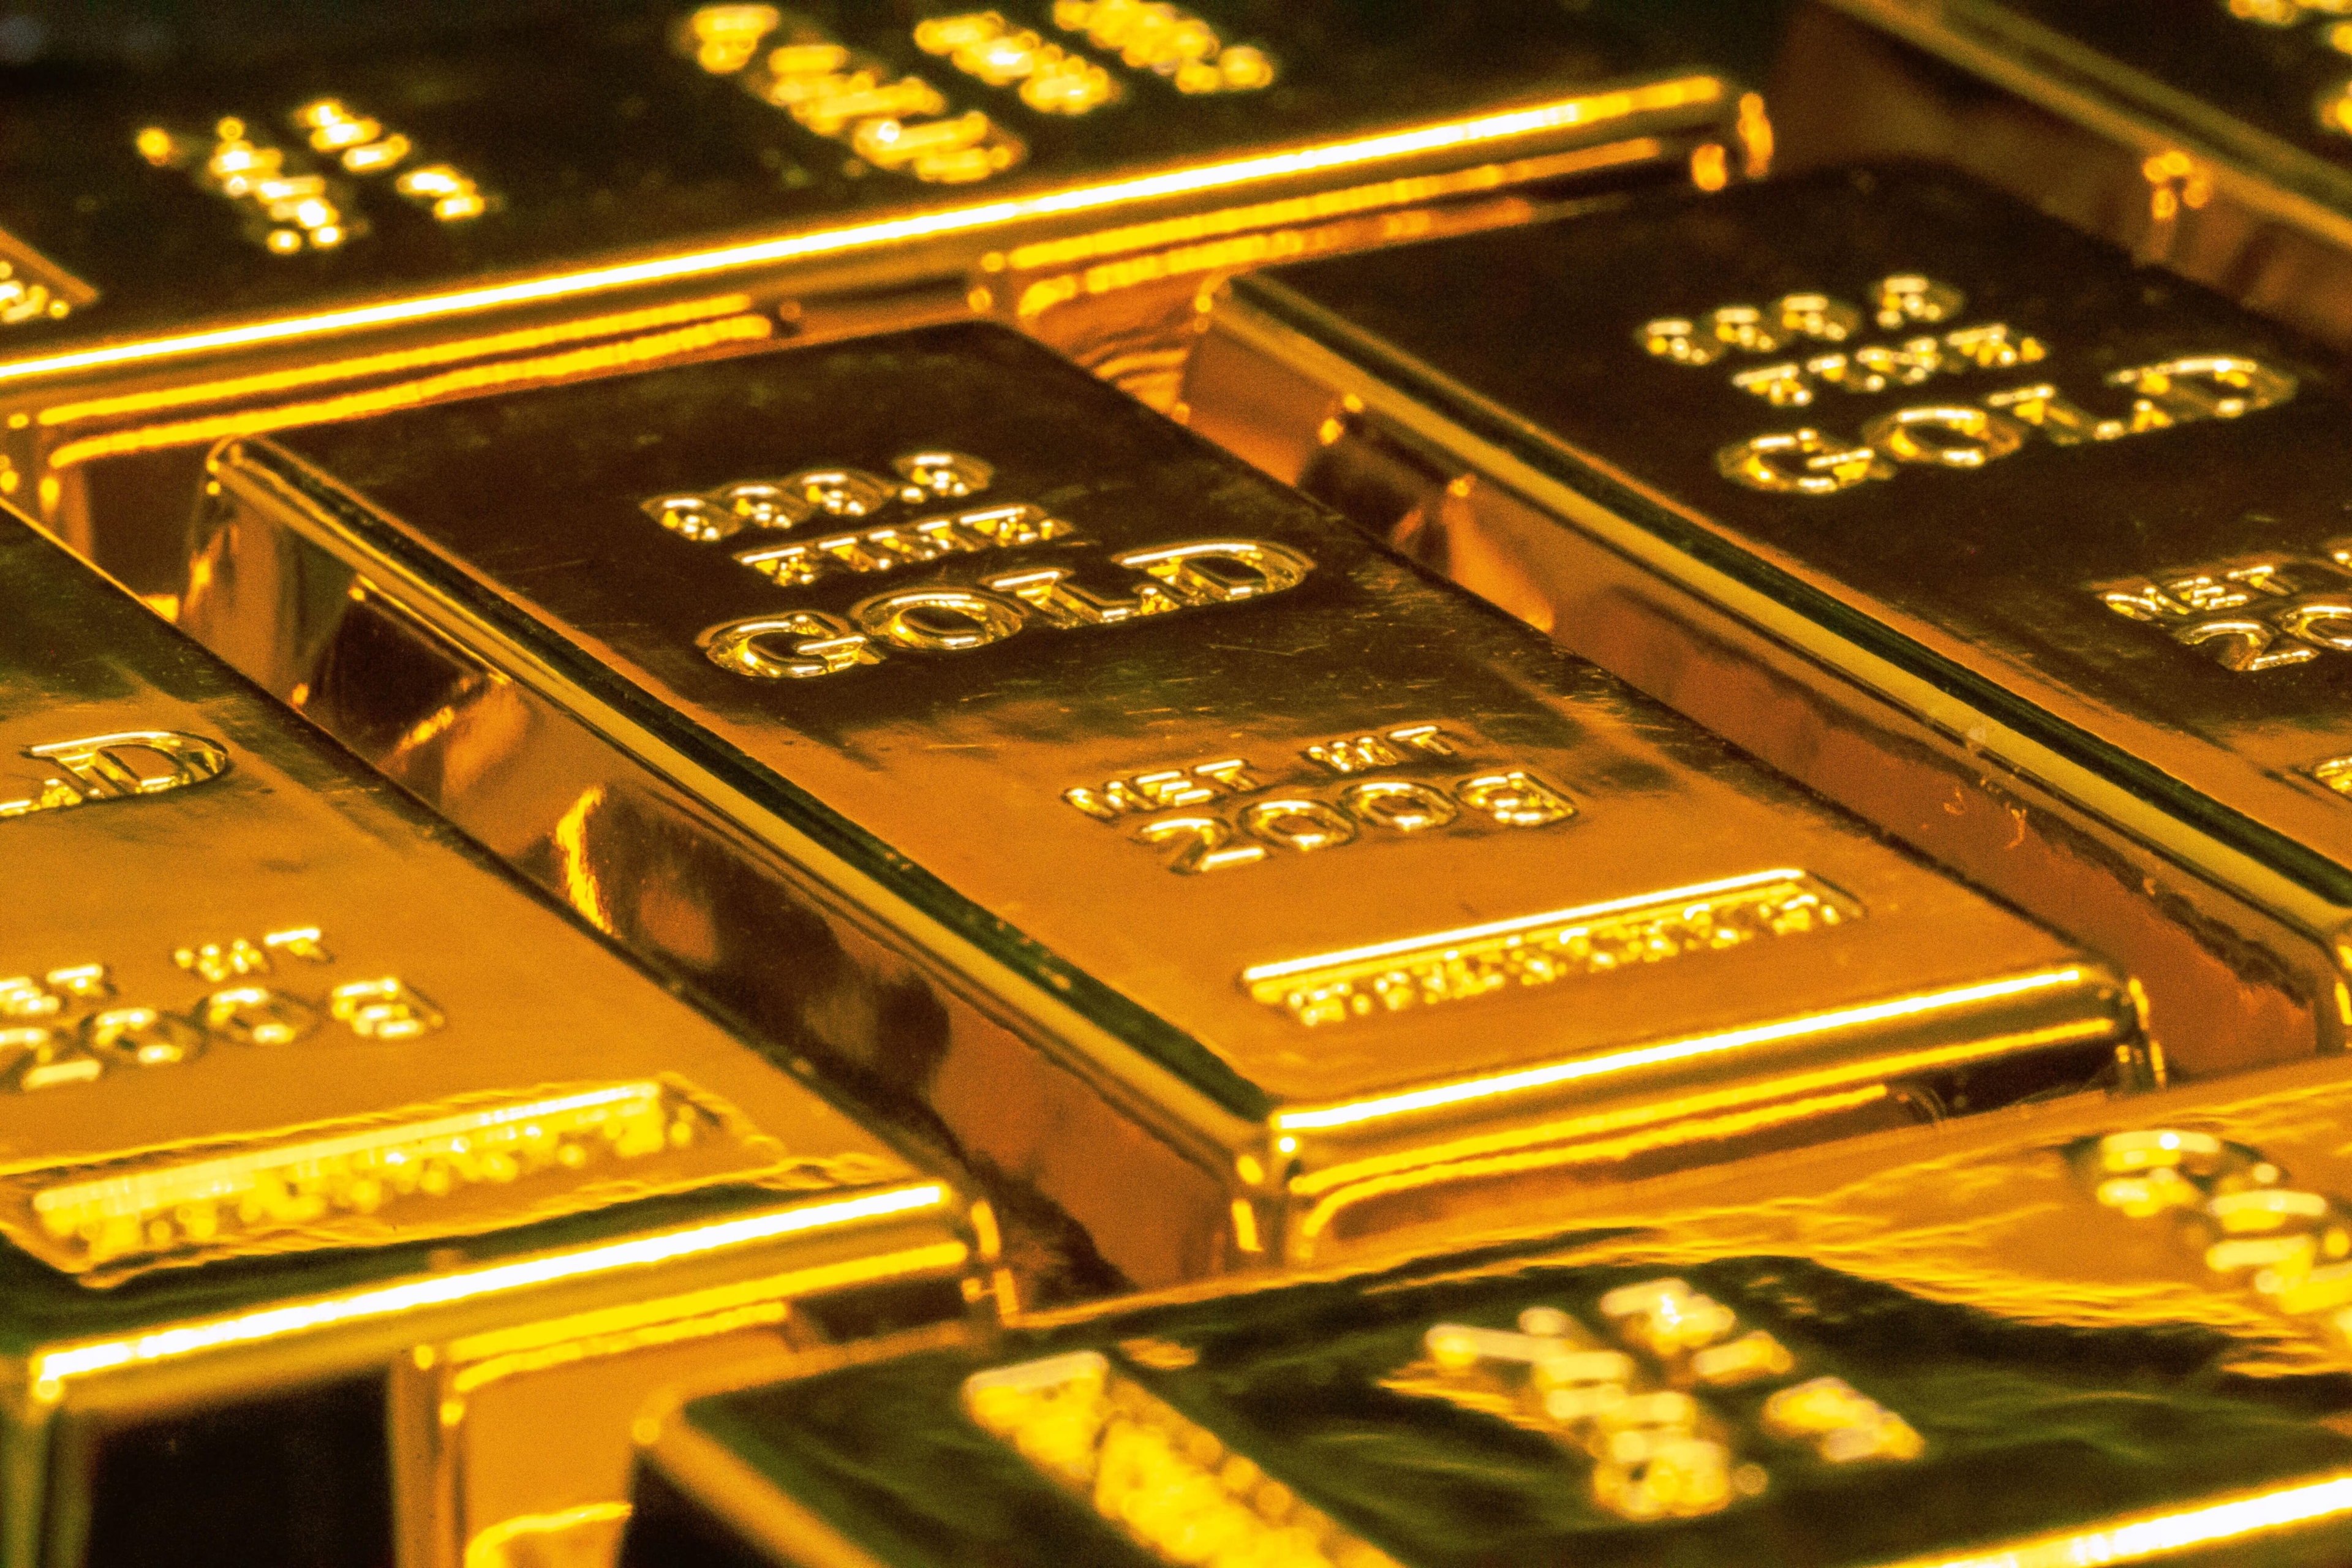 Gold prices rose to a more than one-week high on March 24 amid inflation worries and uncertainty due to the Russia-Ukraine war. Holdings of SPDR Gold Trust, the world's largest gold-backed exchange-traded fund, rose to its highest level since February 2021 on March 23. Precious metals have been gaining even though the US Federal Reserve raised interest rates and also hinted for aggressive hikes and spike in bond yields.